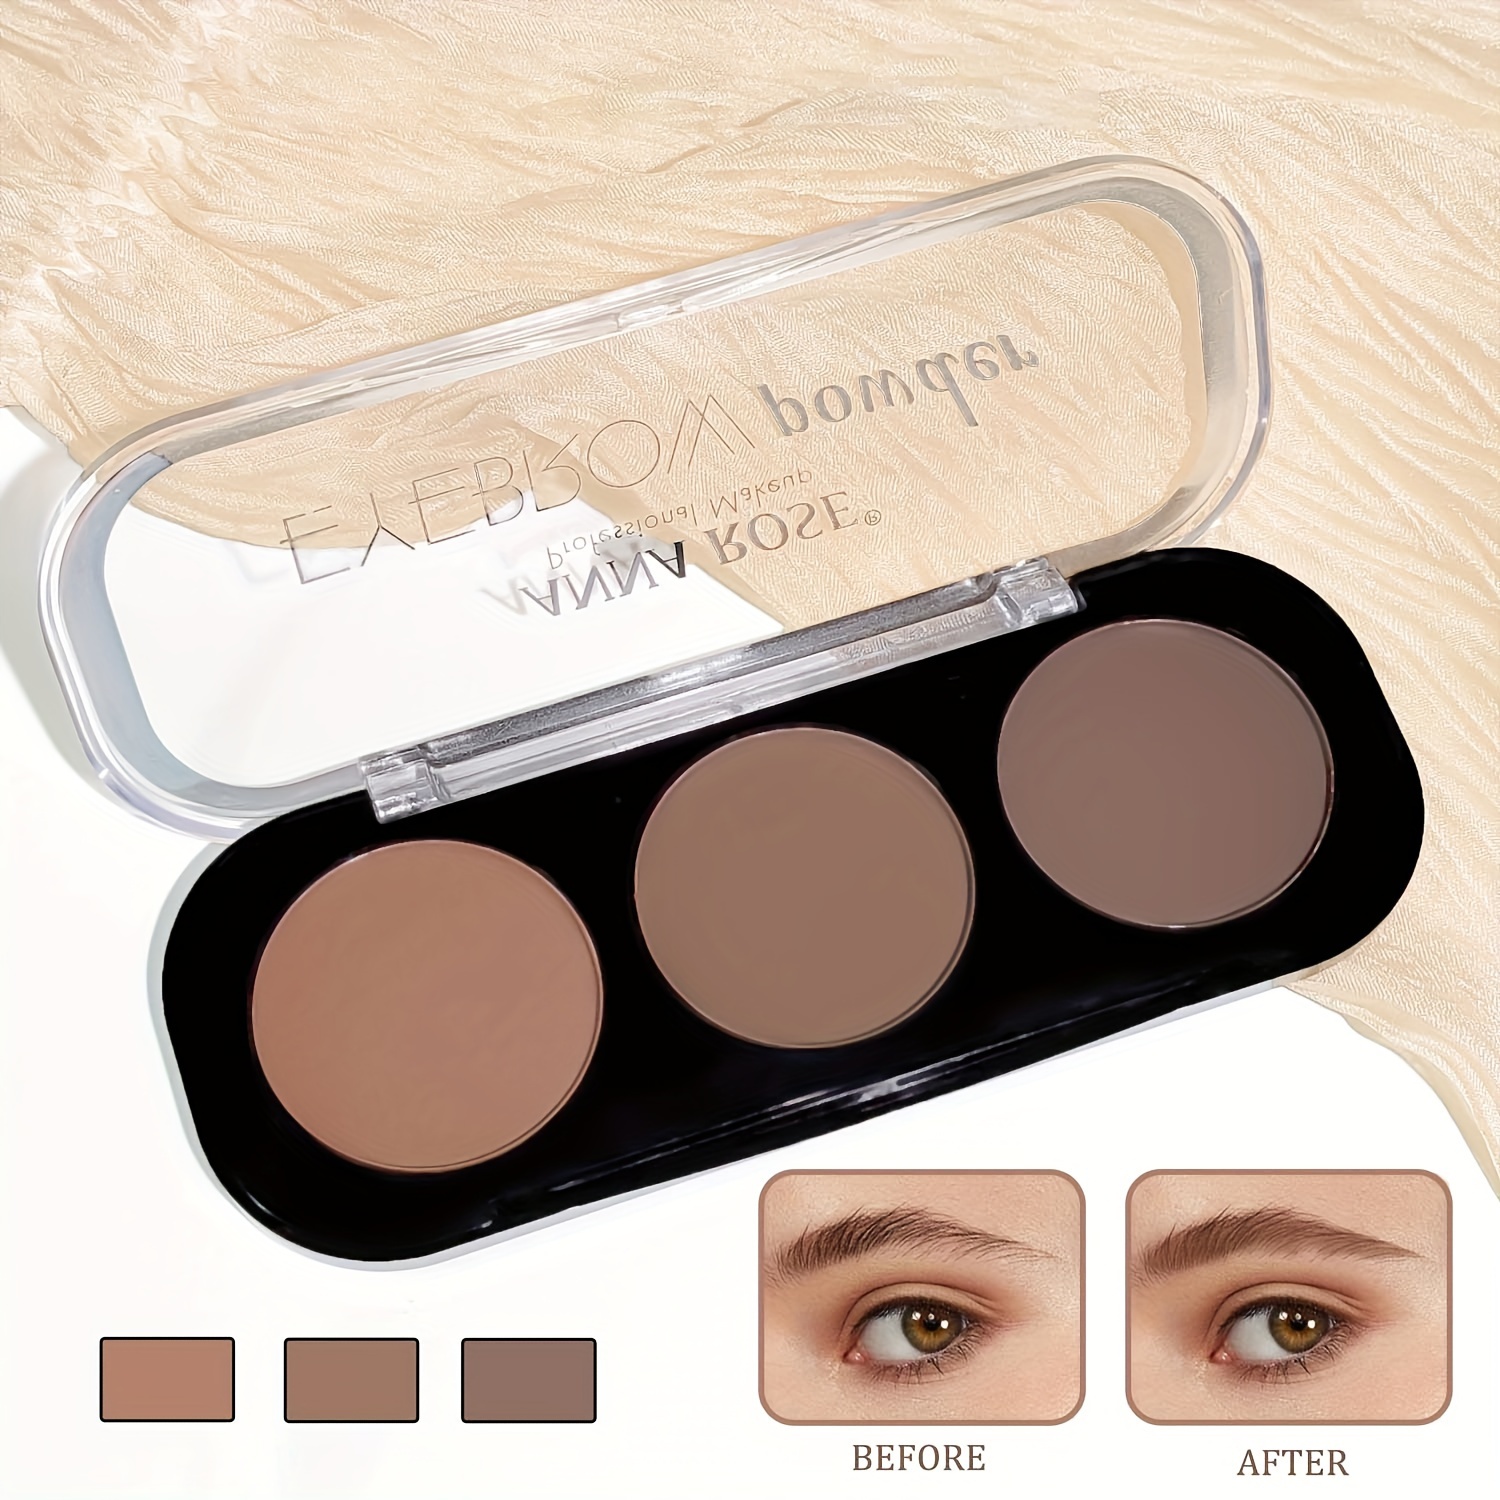 

3-color Eyebrow Powder Palette, Matte, Natural, Highly Pigmented, Waterproof, Sweat-proof, Long-lasting, Colorfast, Smudge Proof Multifunctional Eyebrow Powder Palette